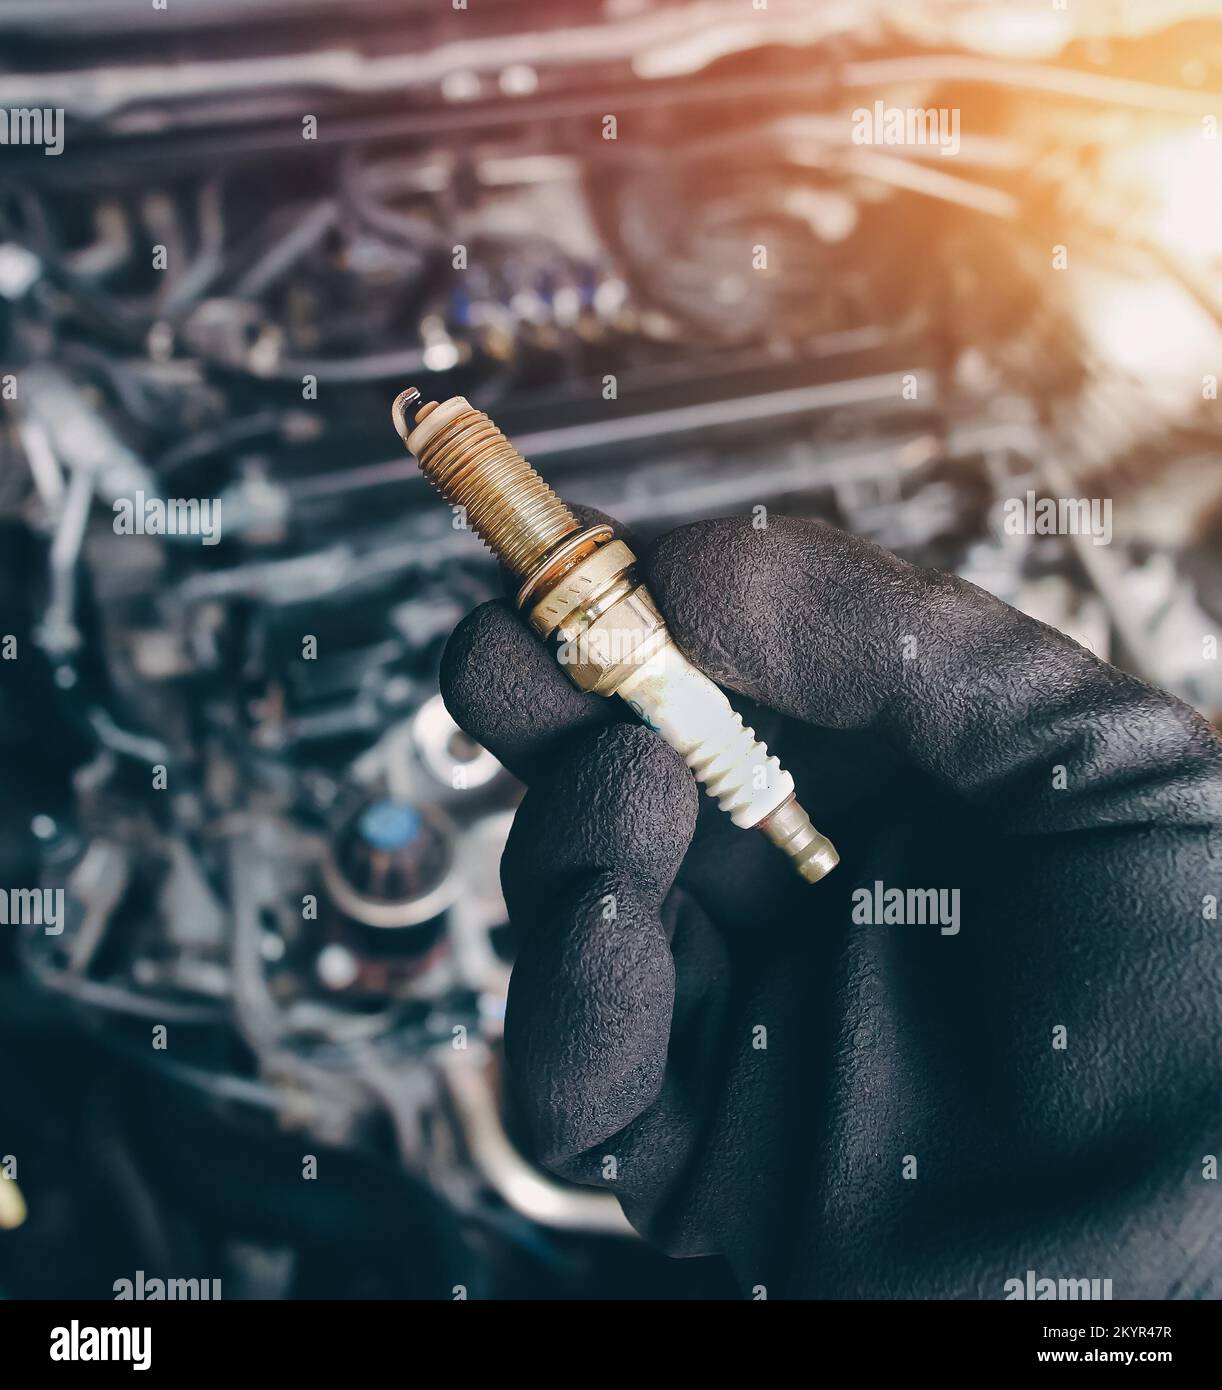 Automobile iridium spark plugs holds by auto mechanic hand with engine compartment blurred background and sunlight. Stock Photo